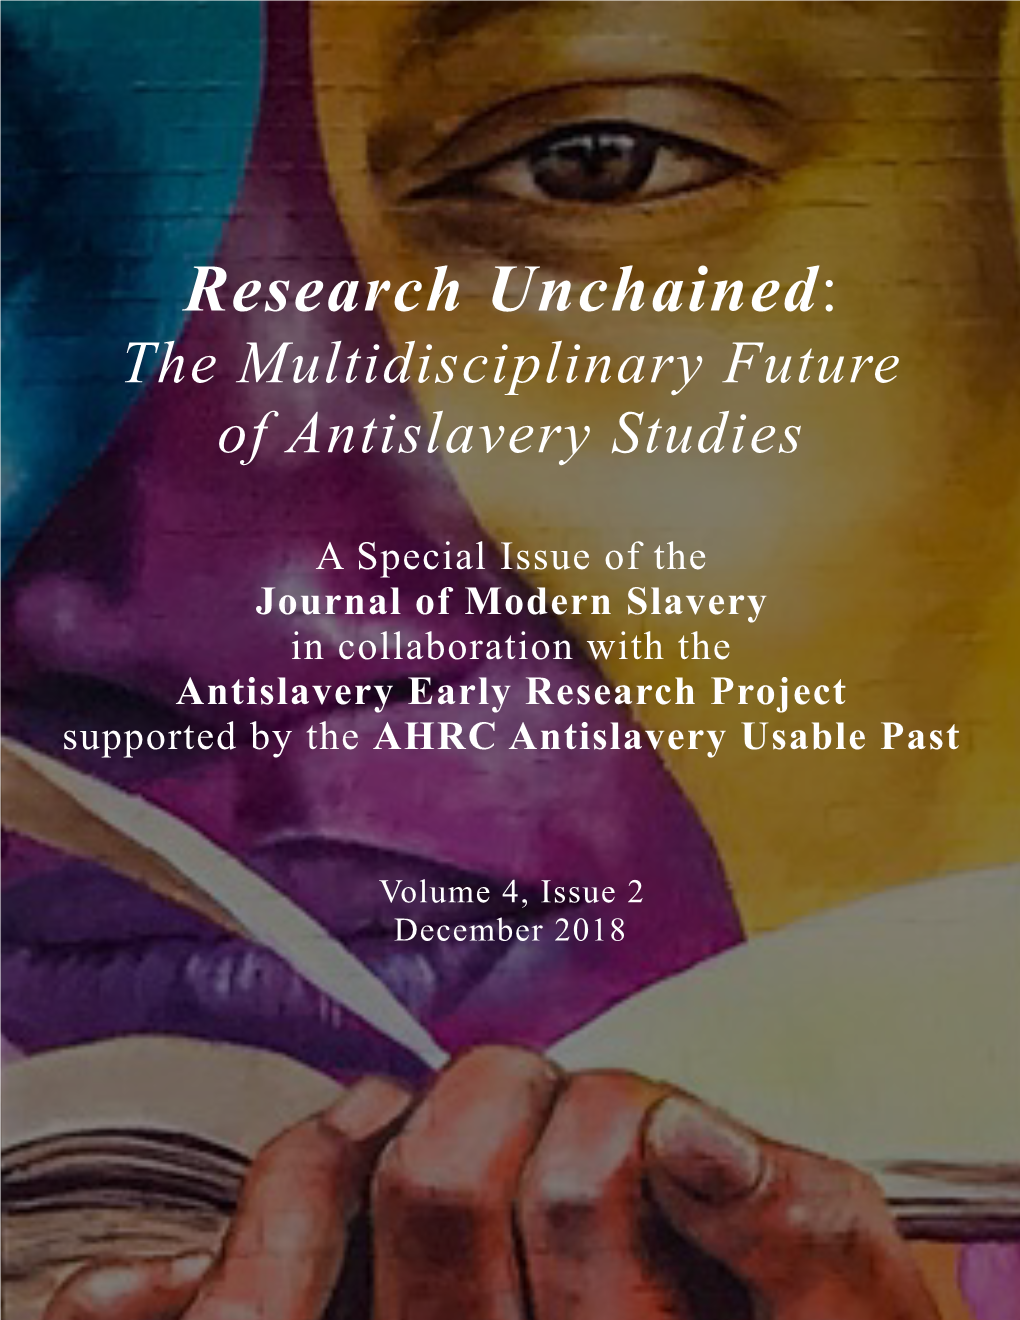 Research Unchained: the Multidisciplinary Future of Antislavery Studies